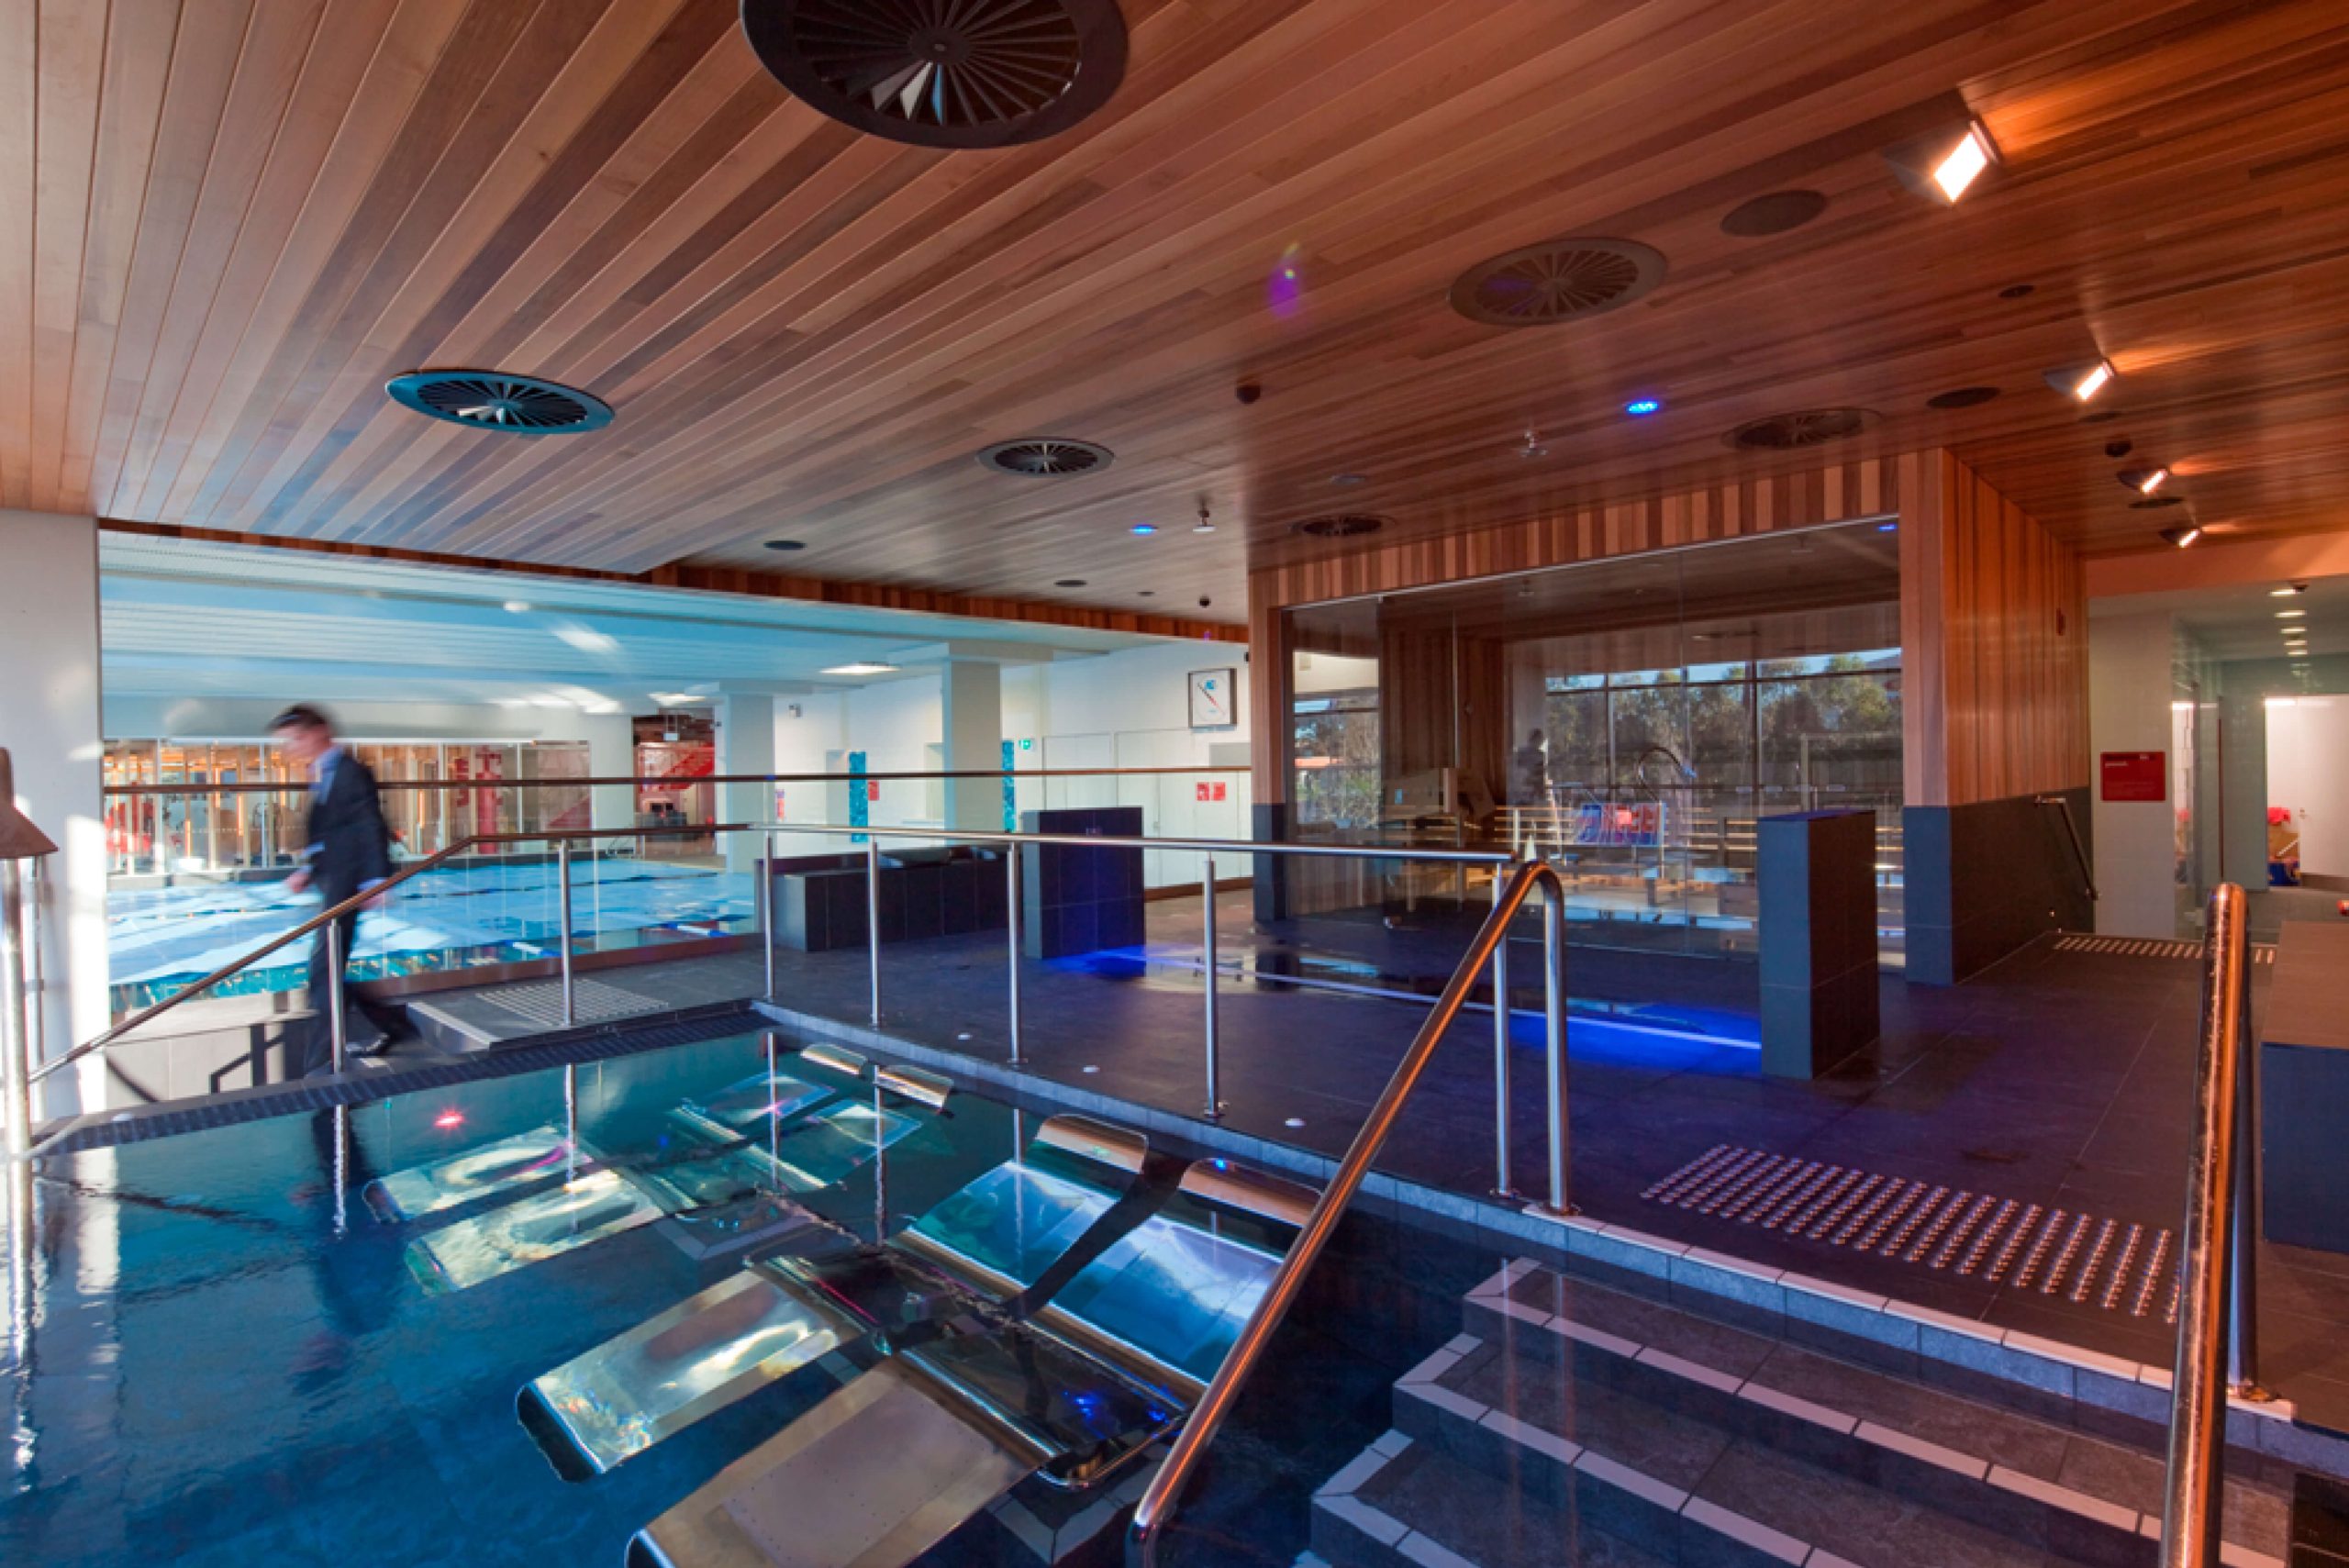 3 sauna and pool virgin active health club taylor construction fitout